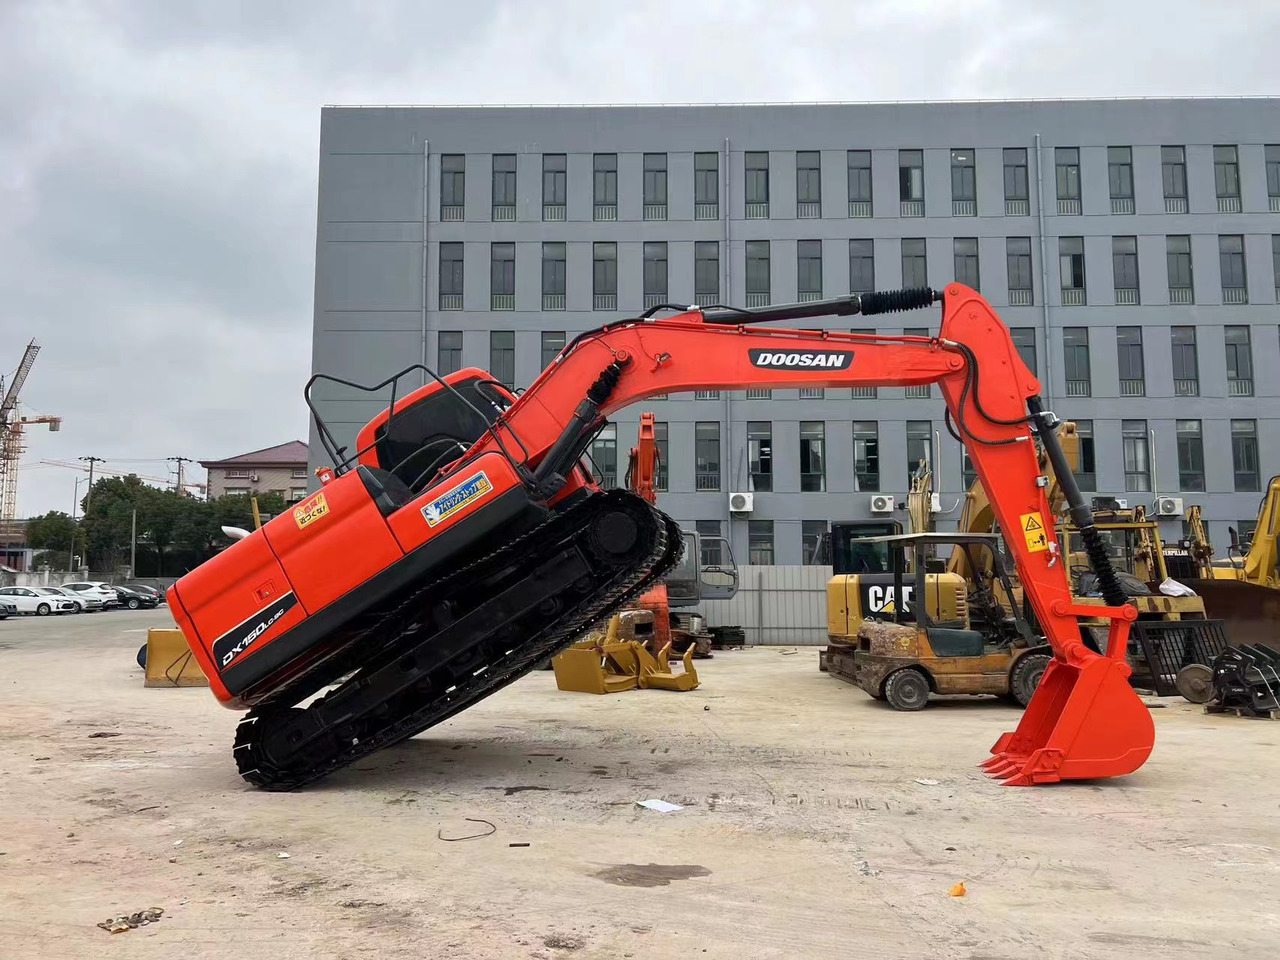 Rupsgraafmachine 2021 made in Korea Good performance High quality used excavator DOOSAN DH150LC-9 good condition in stock on sale: afbeelding 4